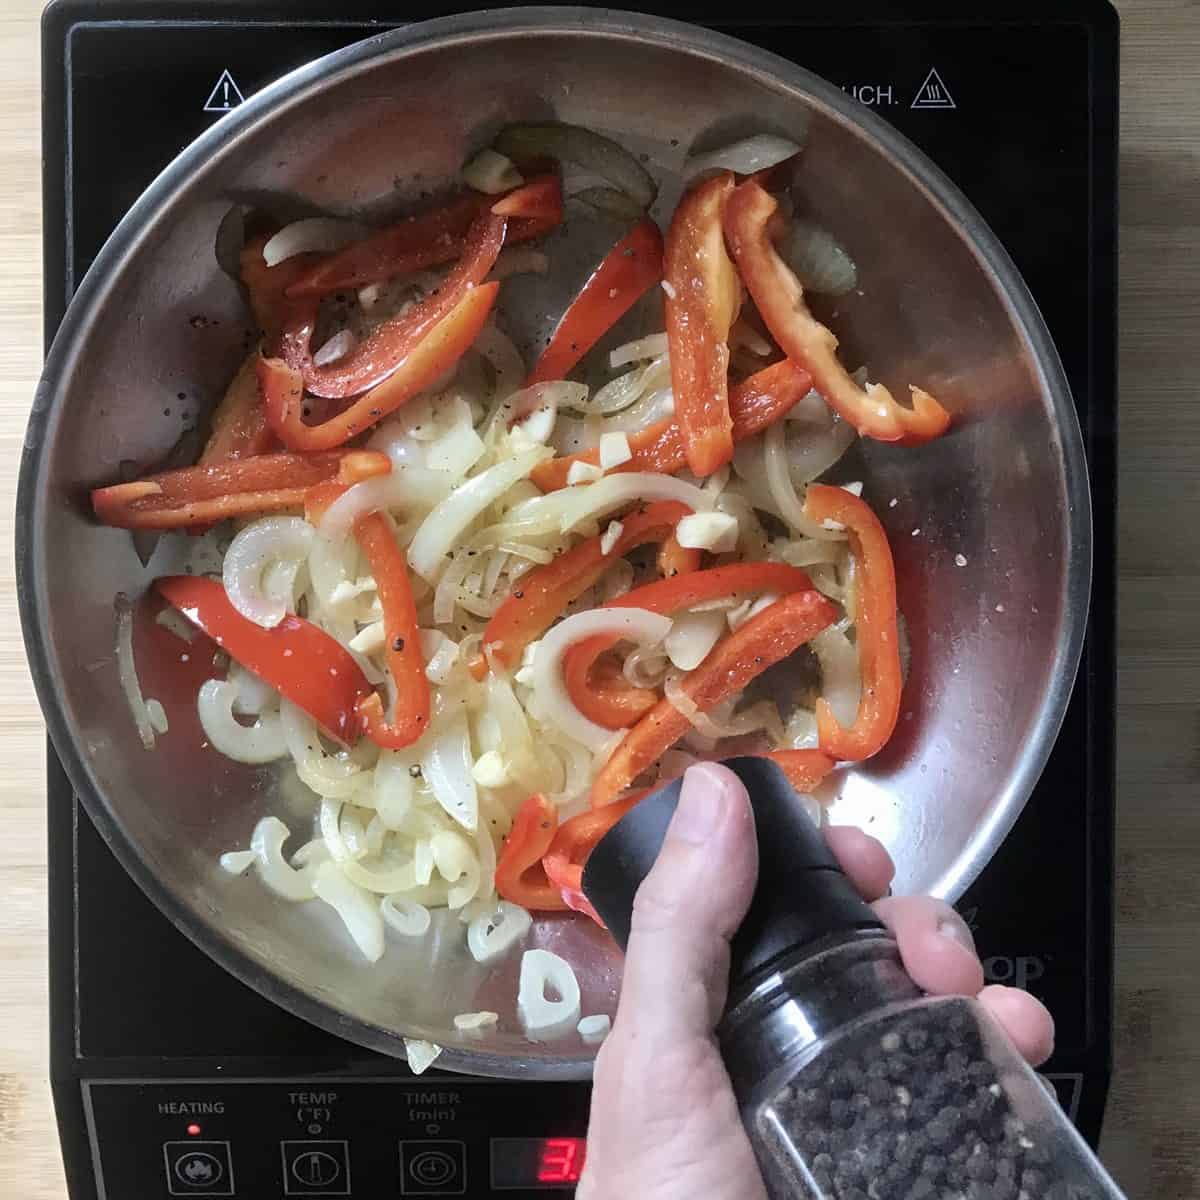 Sliced onions and red peppers are being sauteed in a skillet and seasoned with a grinding of black pepper. 